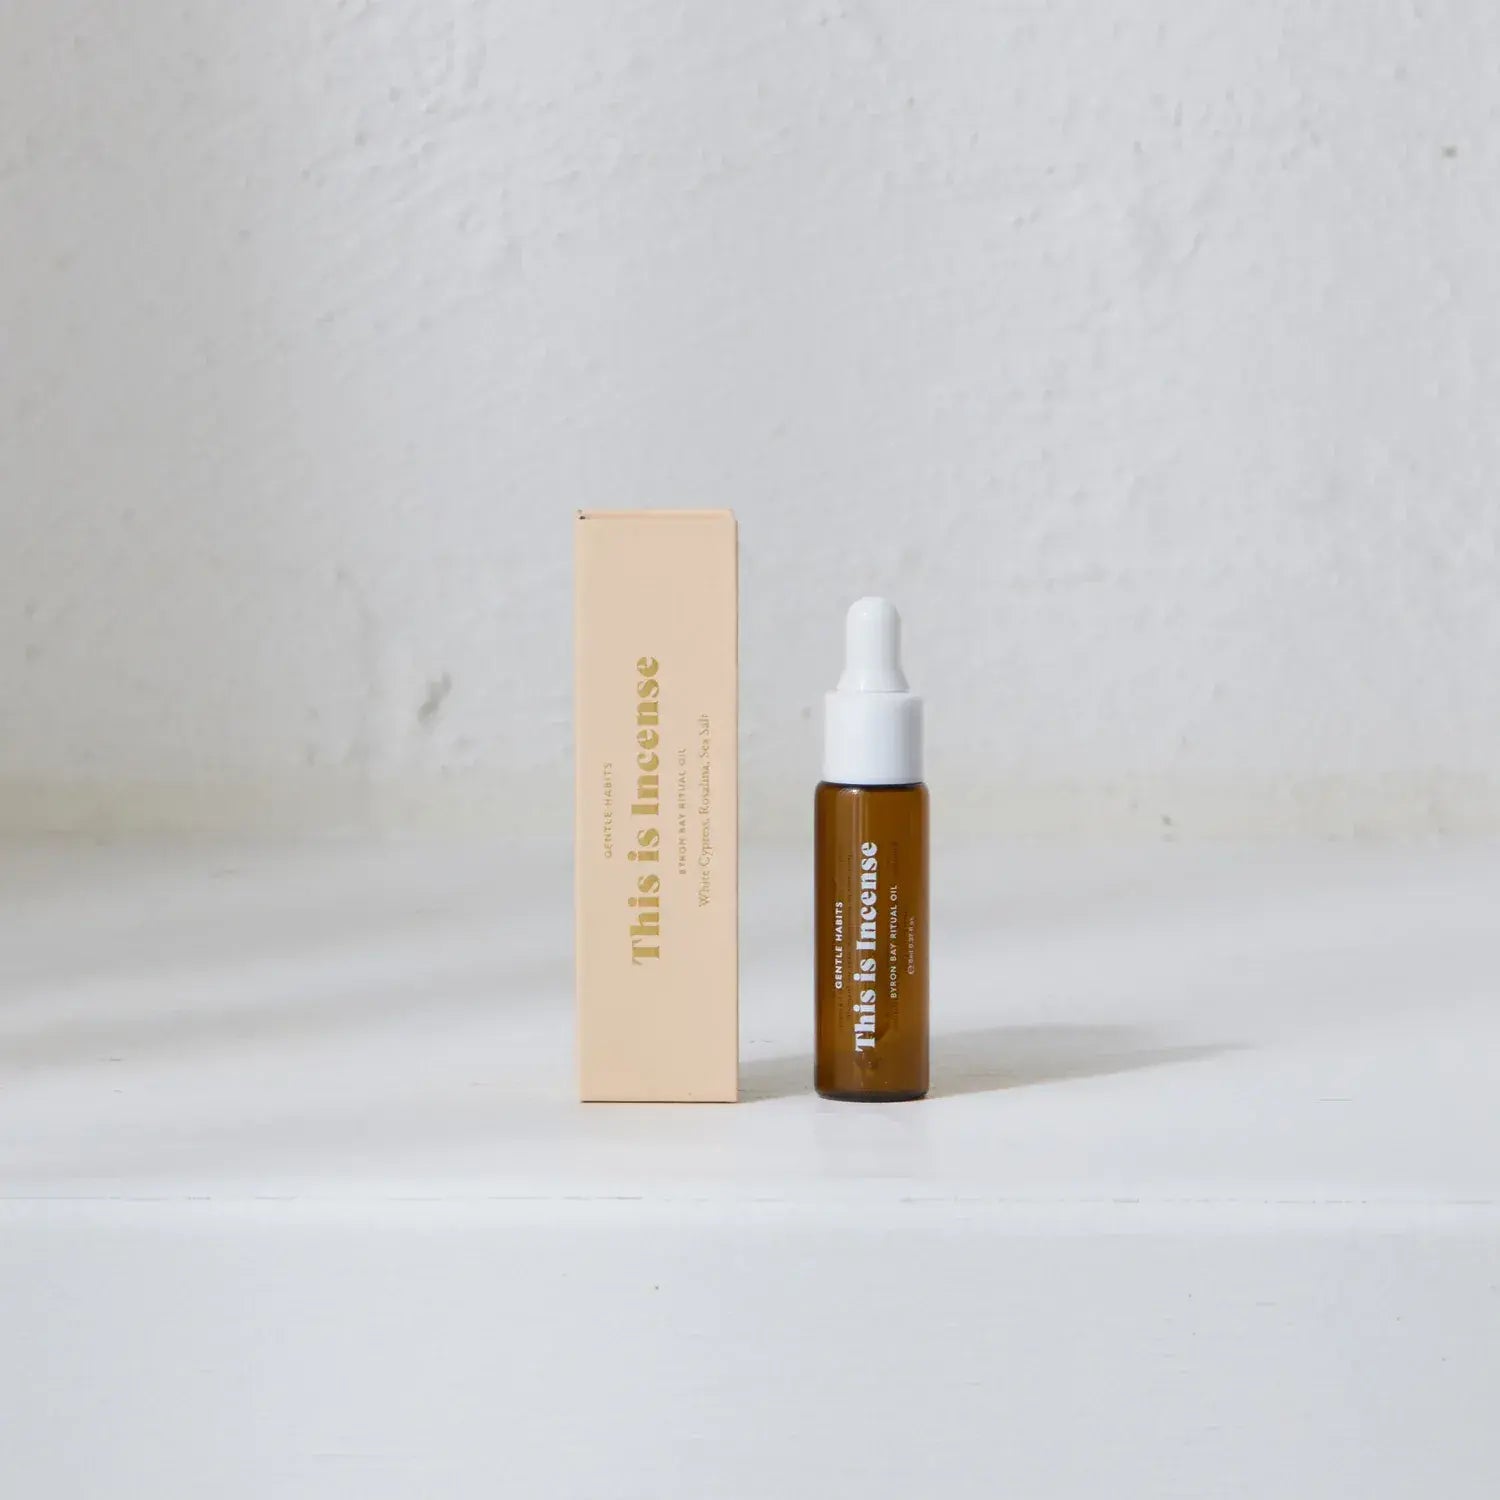 Ritual Diffuser Oil by Gentle Habits - Byron Bay